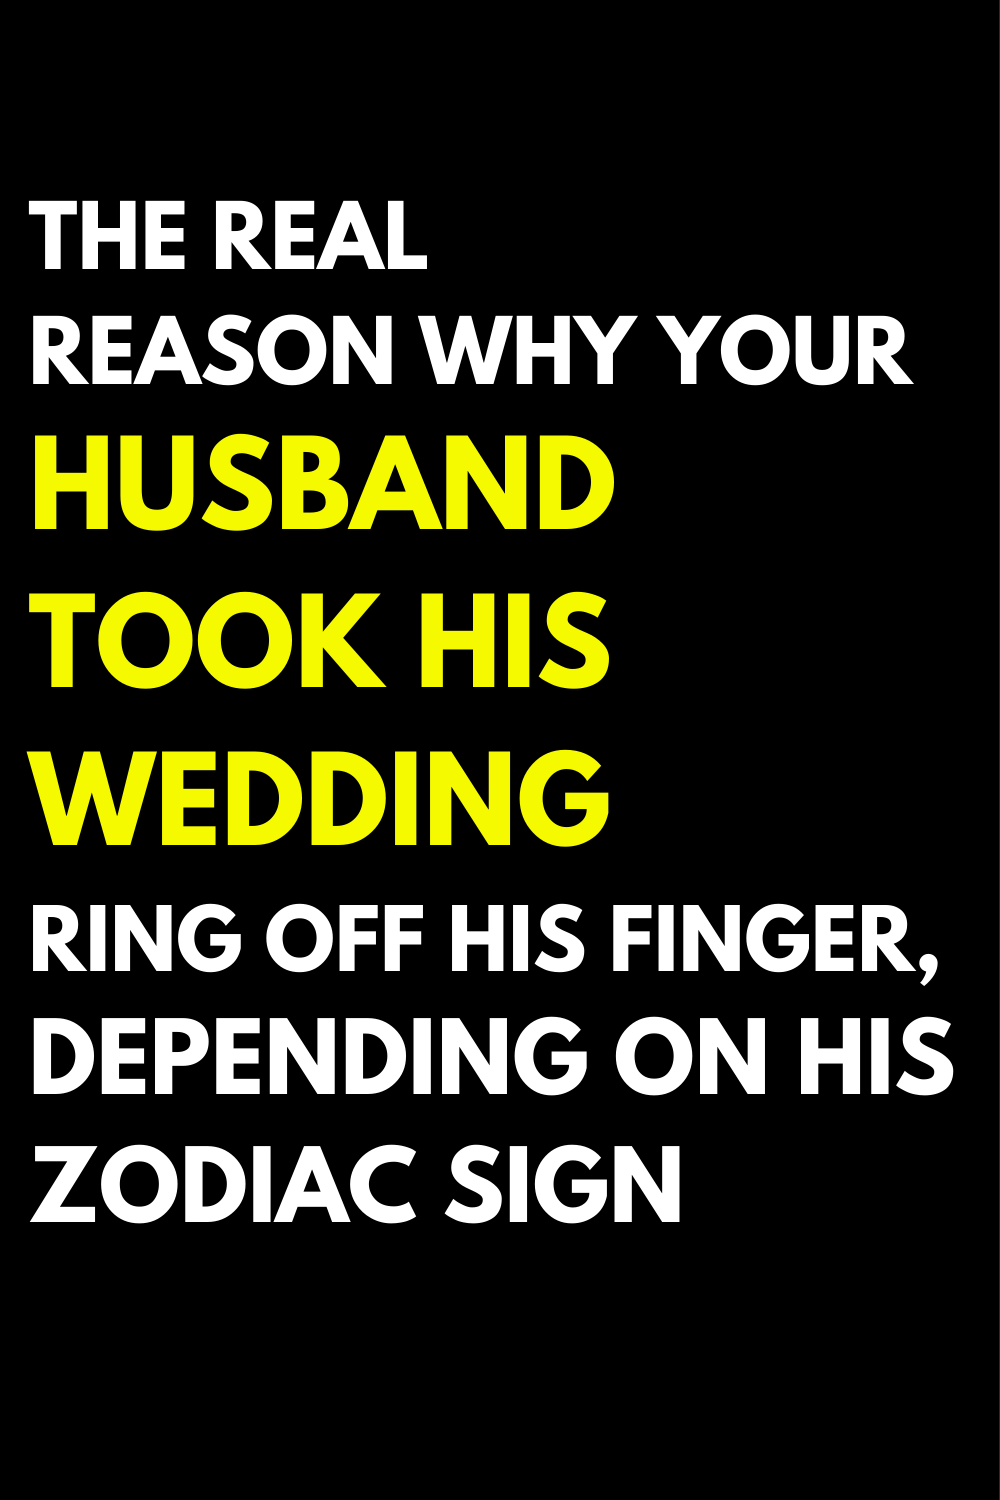 The real reason why your husband took his wedding ring off his finger, depending on his zodiac sign